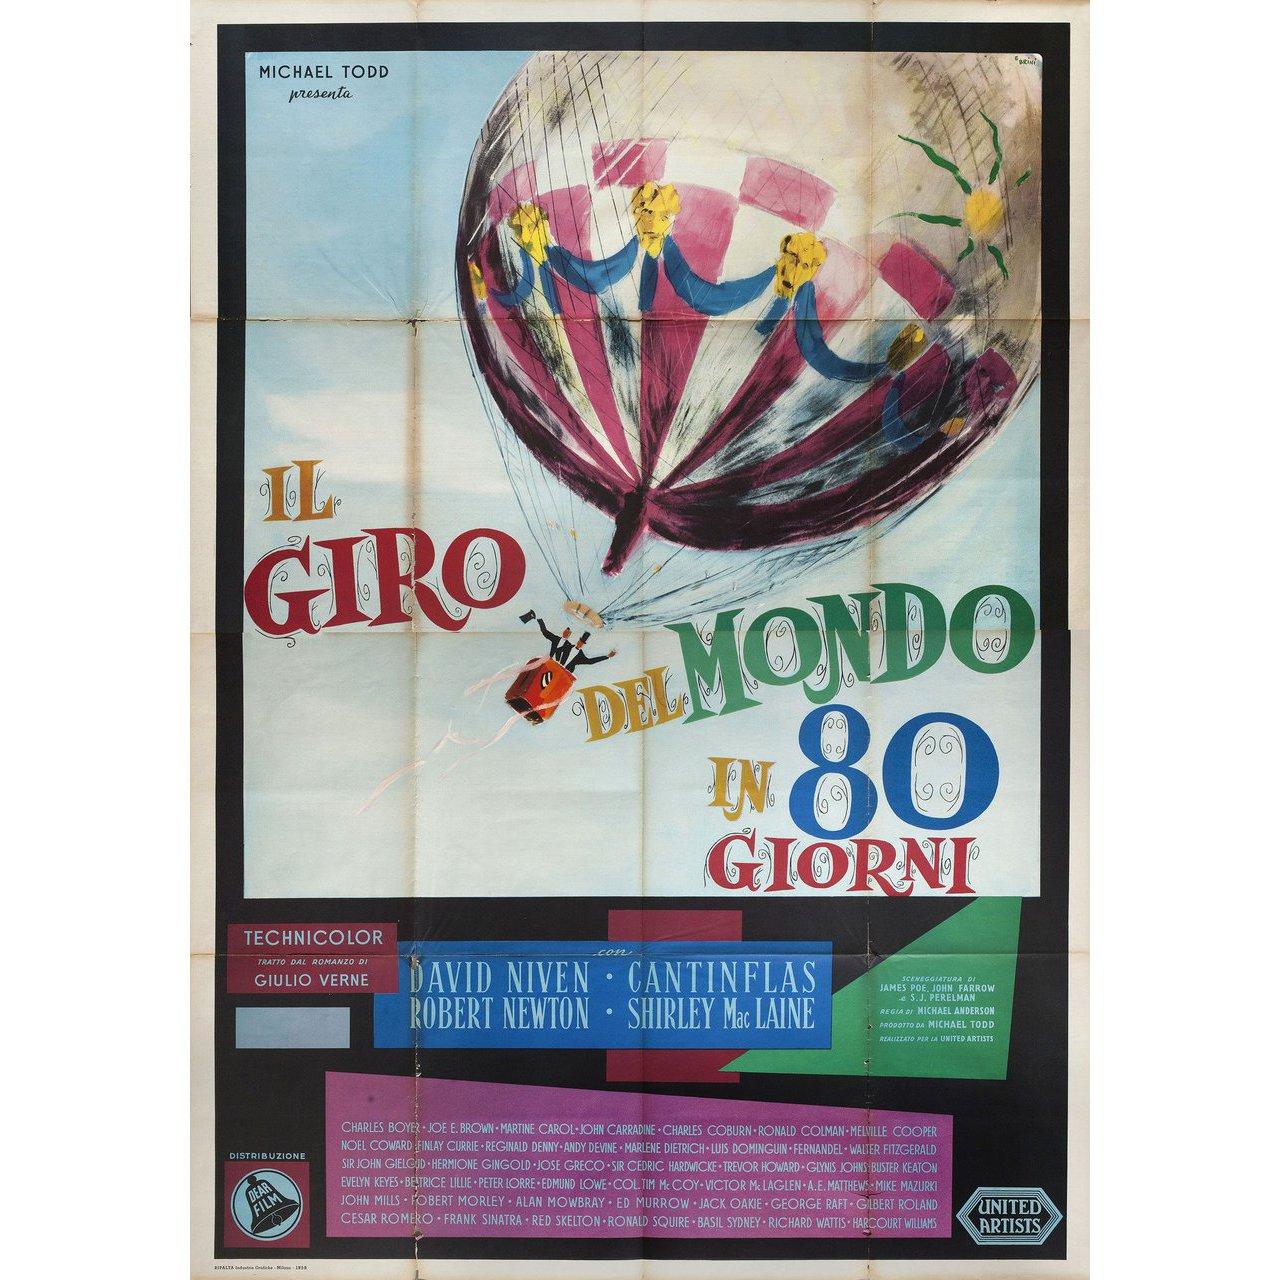 Original 1959 Italian quattro fogli poster by Ercole Brini for. Very Good condition, folded and very brittle. Many original posters were issued folded or were subsequently folded. This poster was printed in multiple sheets. Please note: the size is